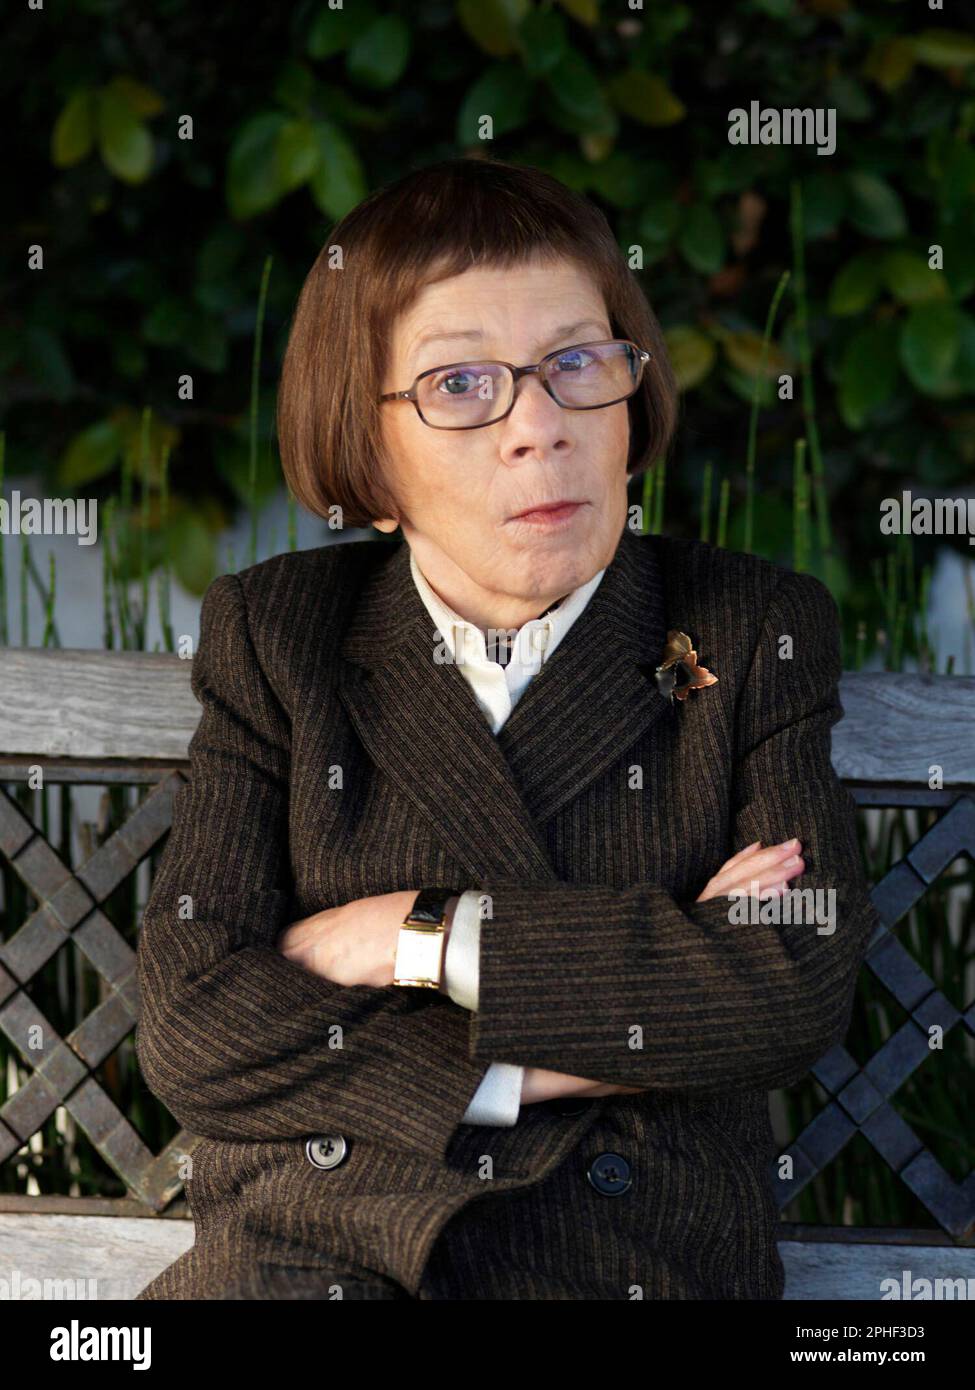 LINDA HUNT in NCIS: LOS ANGELES (2009), directed by TERRENCE O'HARA. Credit: CBS TELEVISION / Album Stock Photo